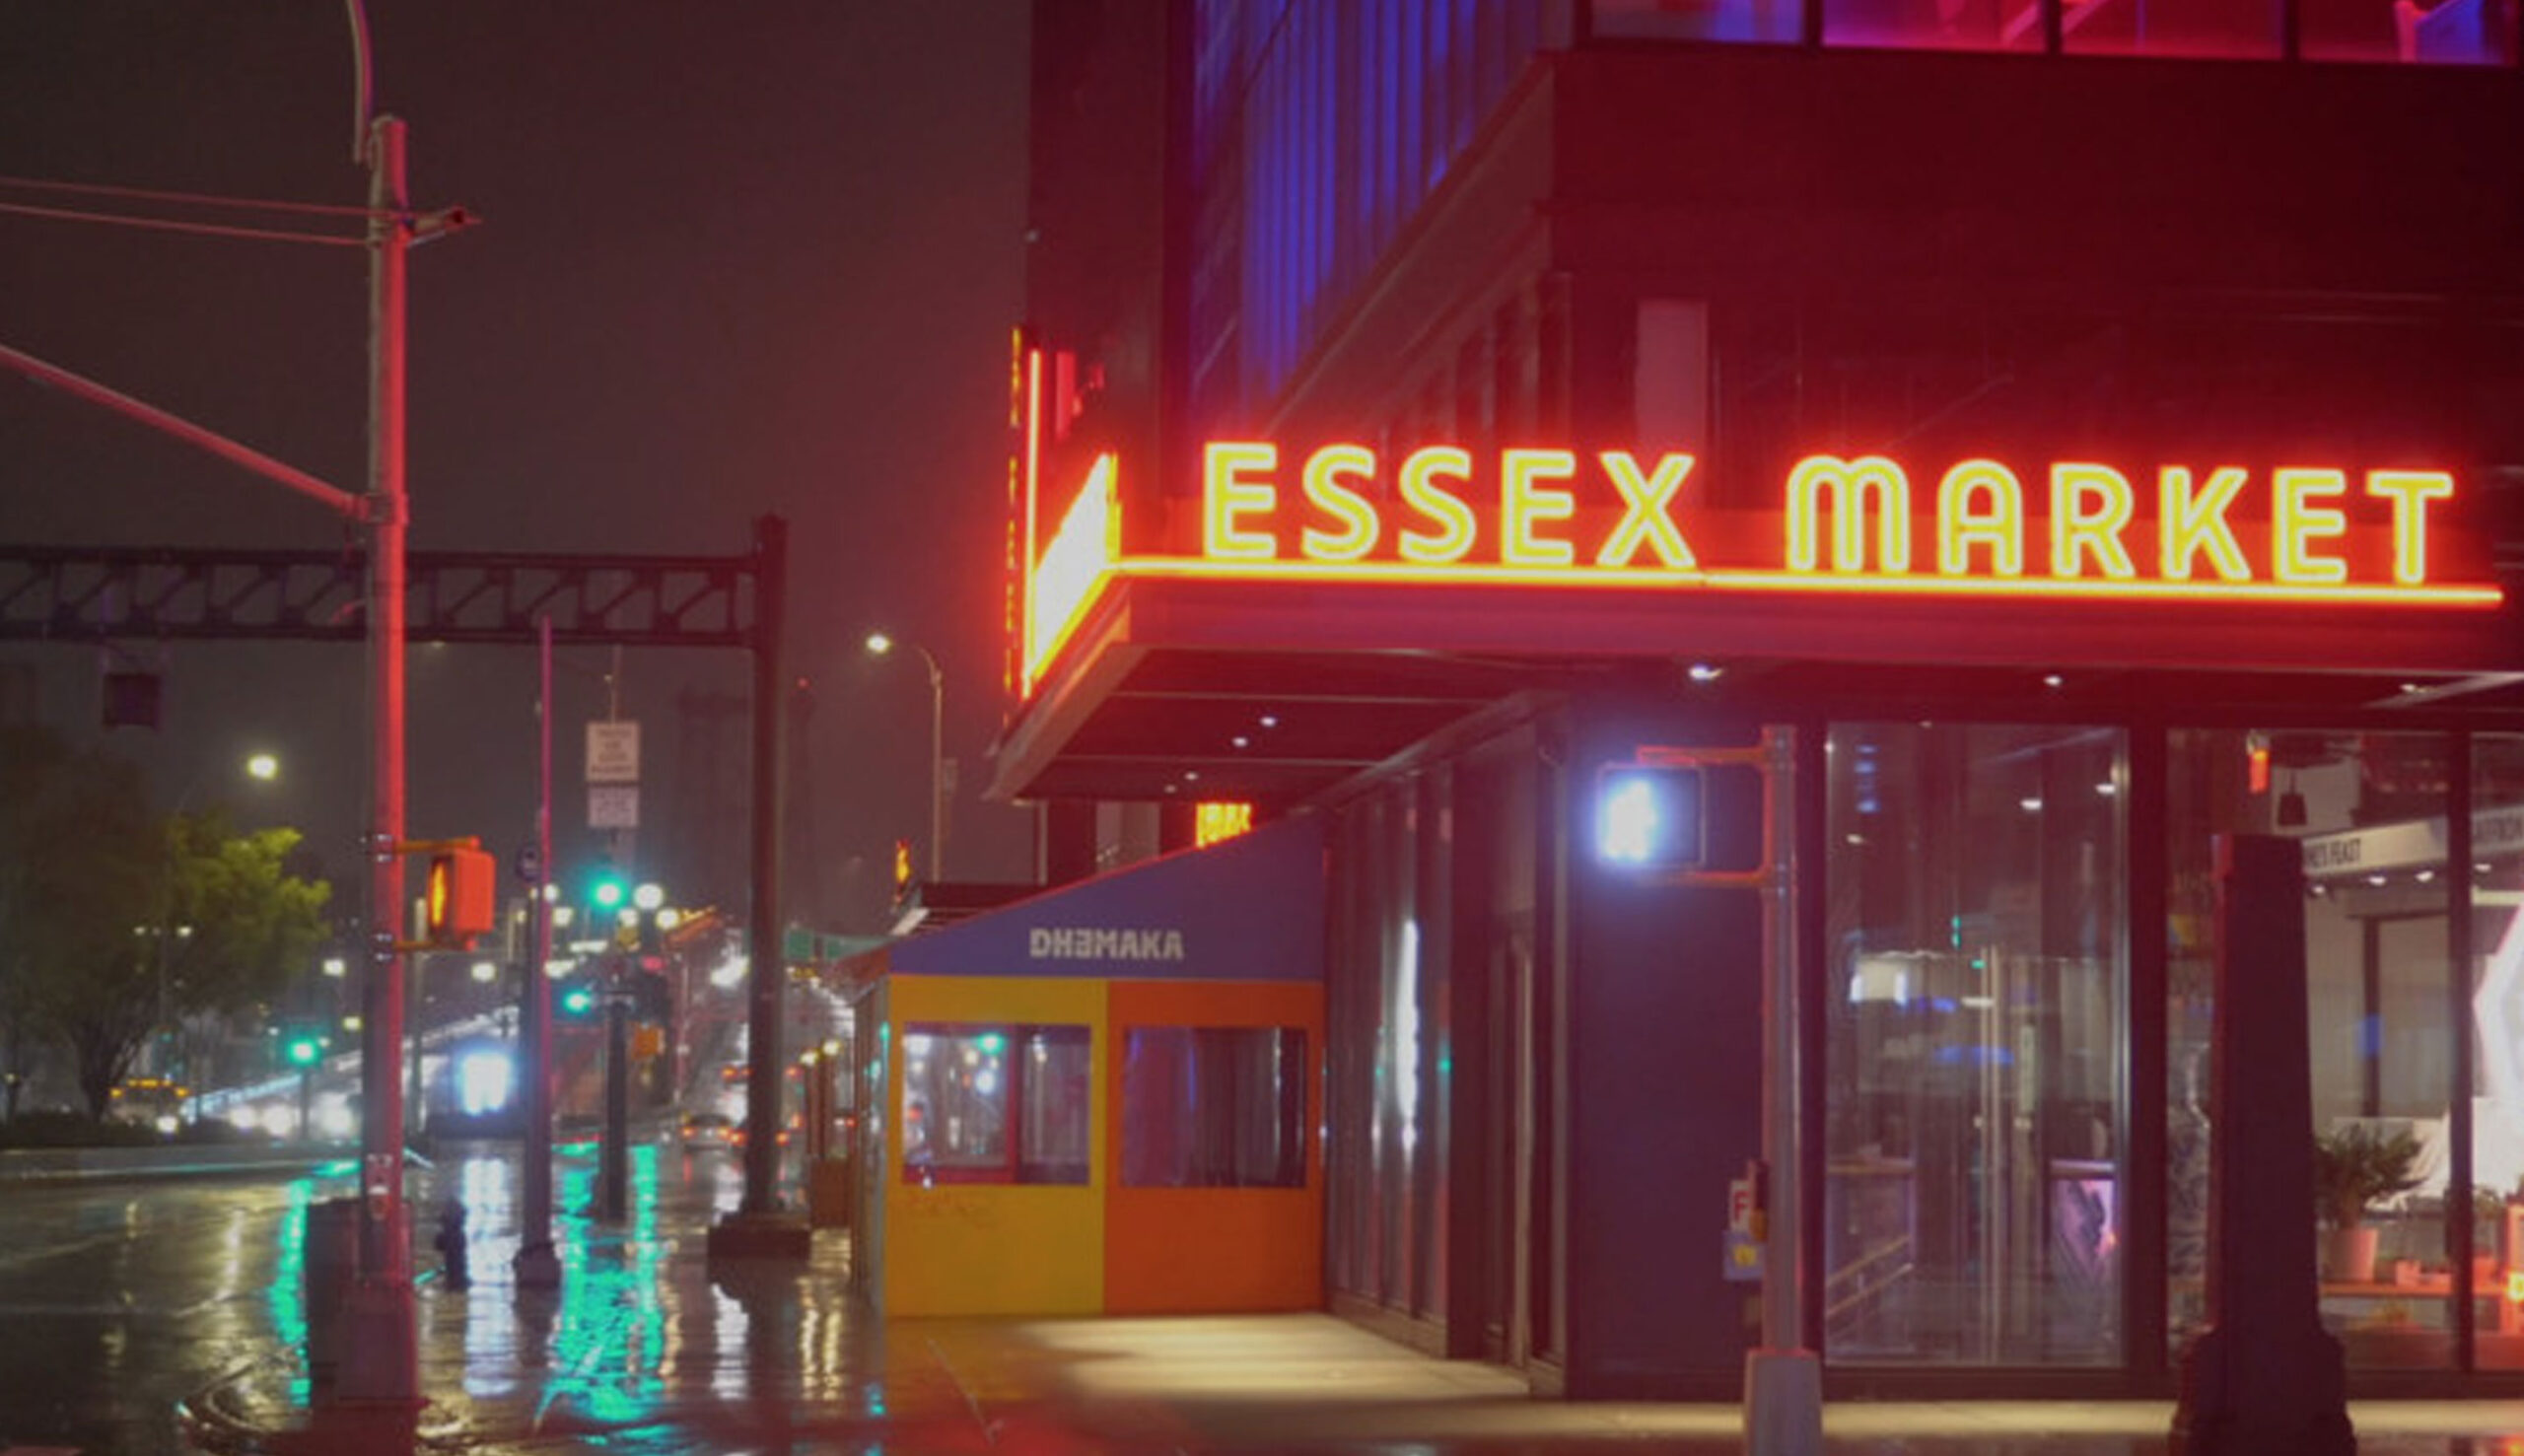 The Essex Market – A Day in the Life